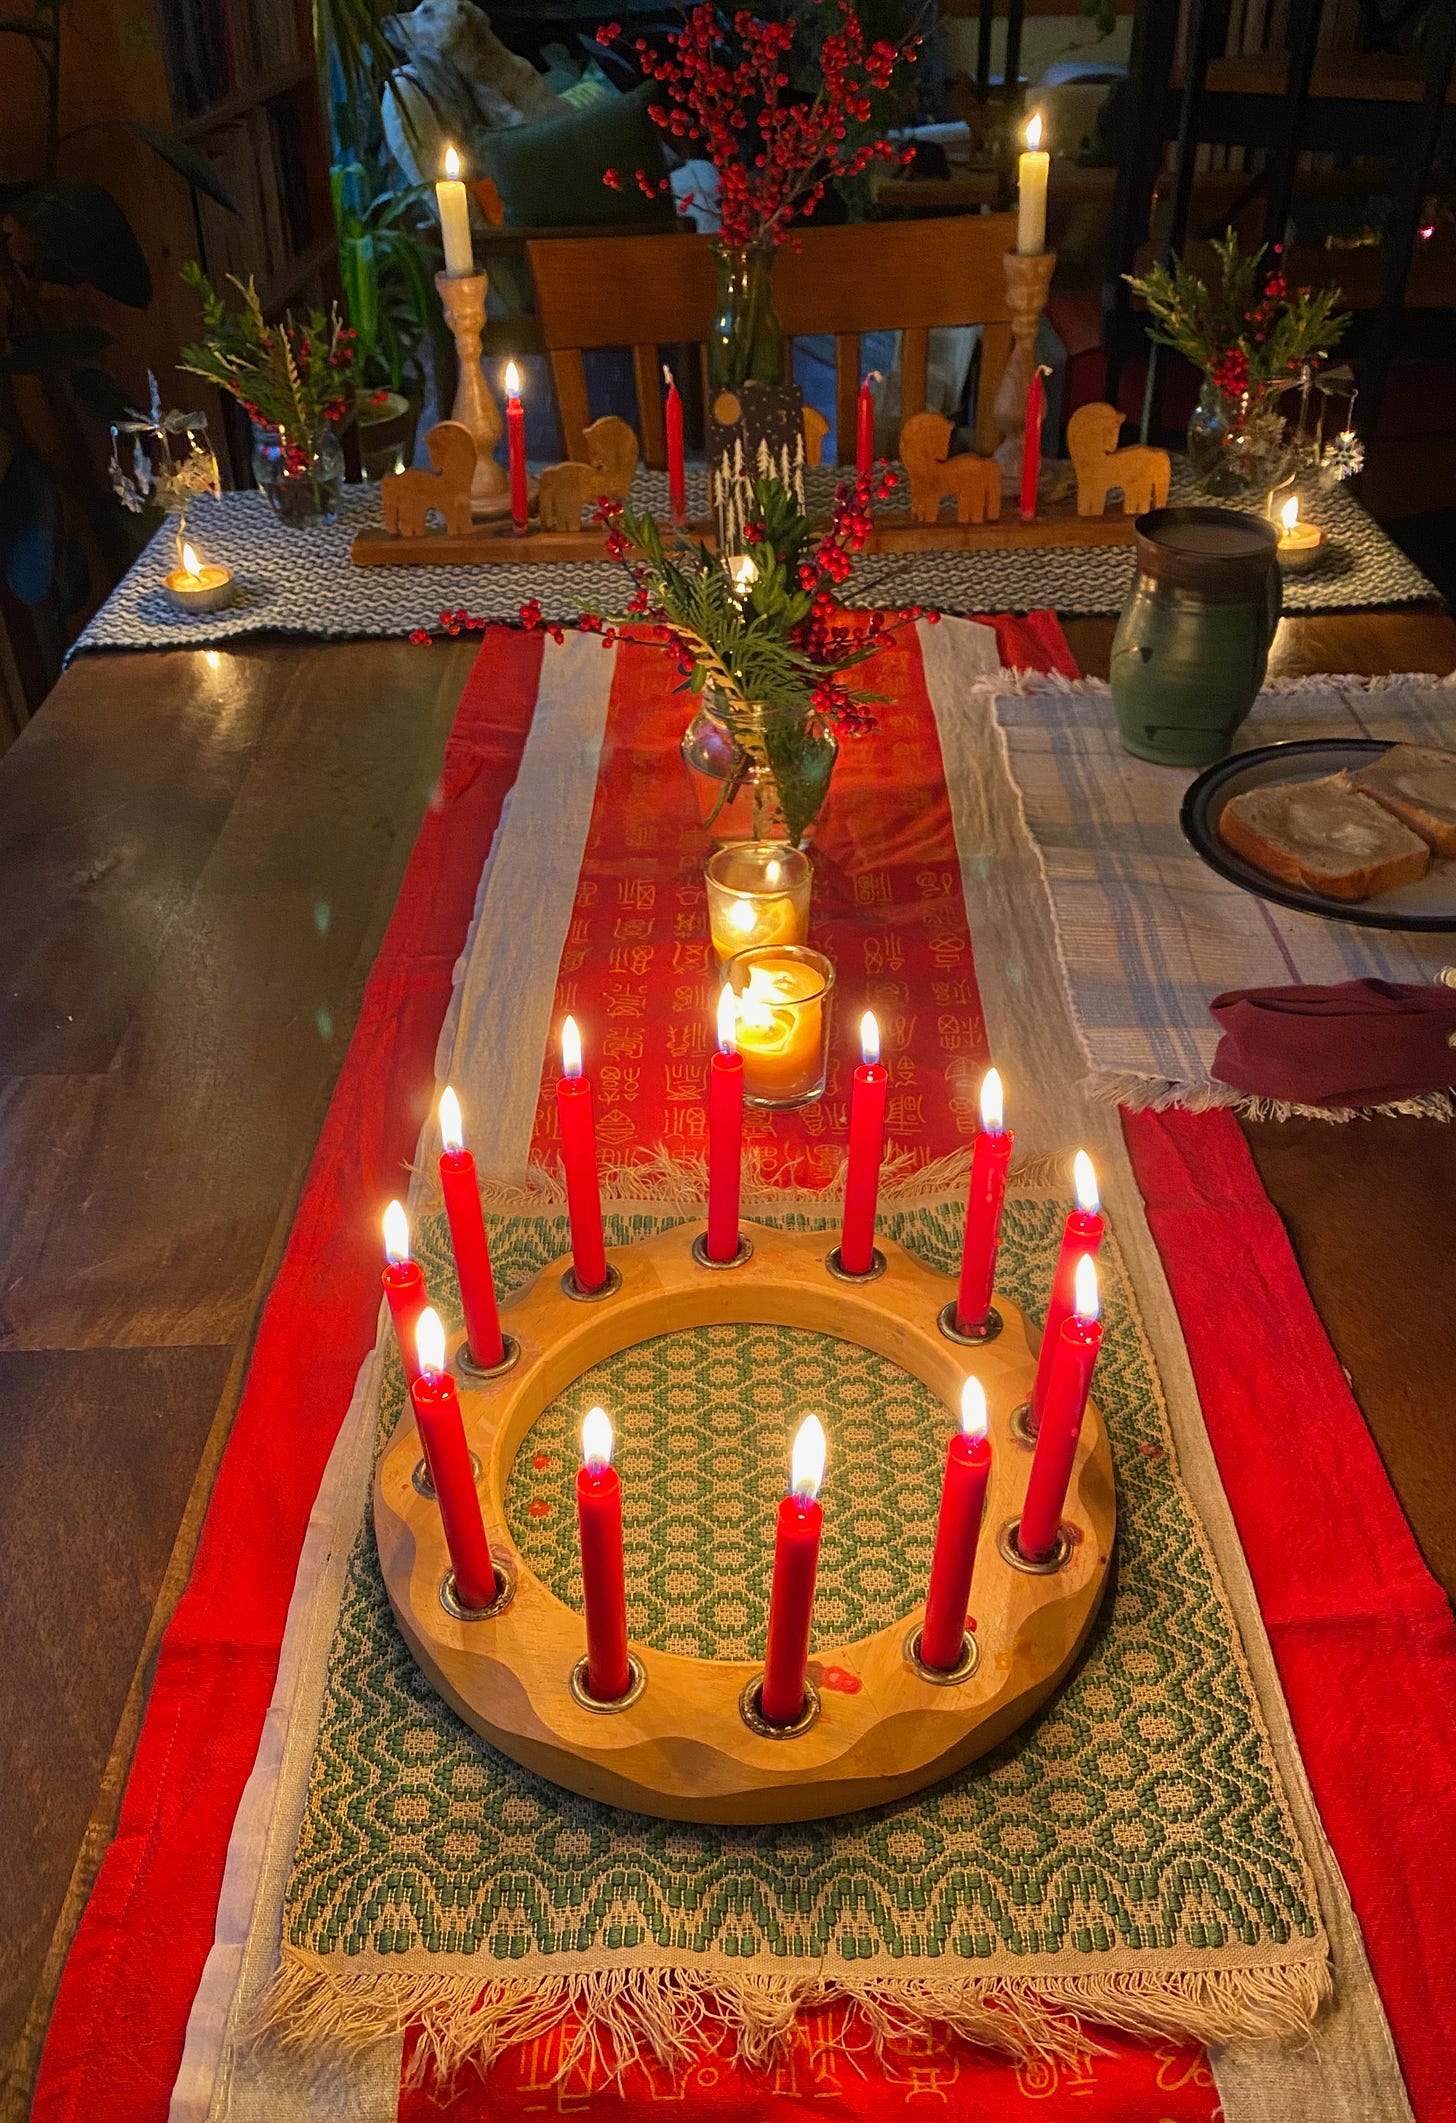 A dining table with a bright red runner filled with lit candles of various sizes, and jars of winterberry and greenery.